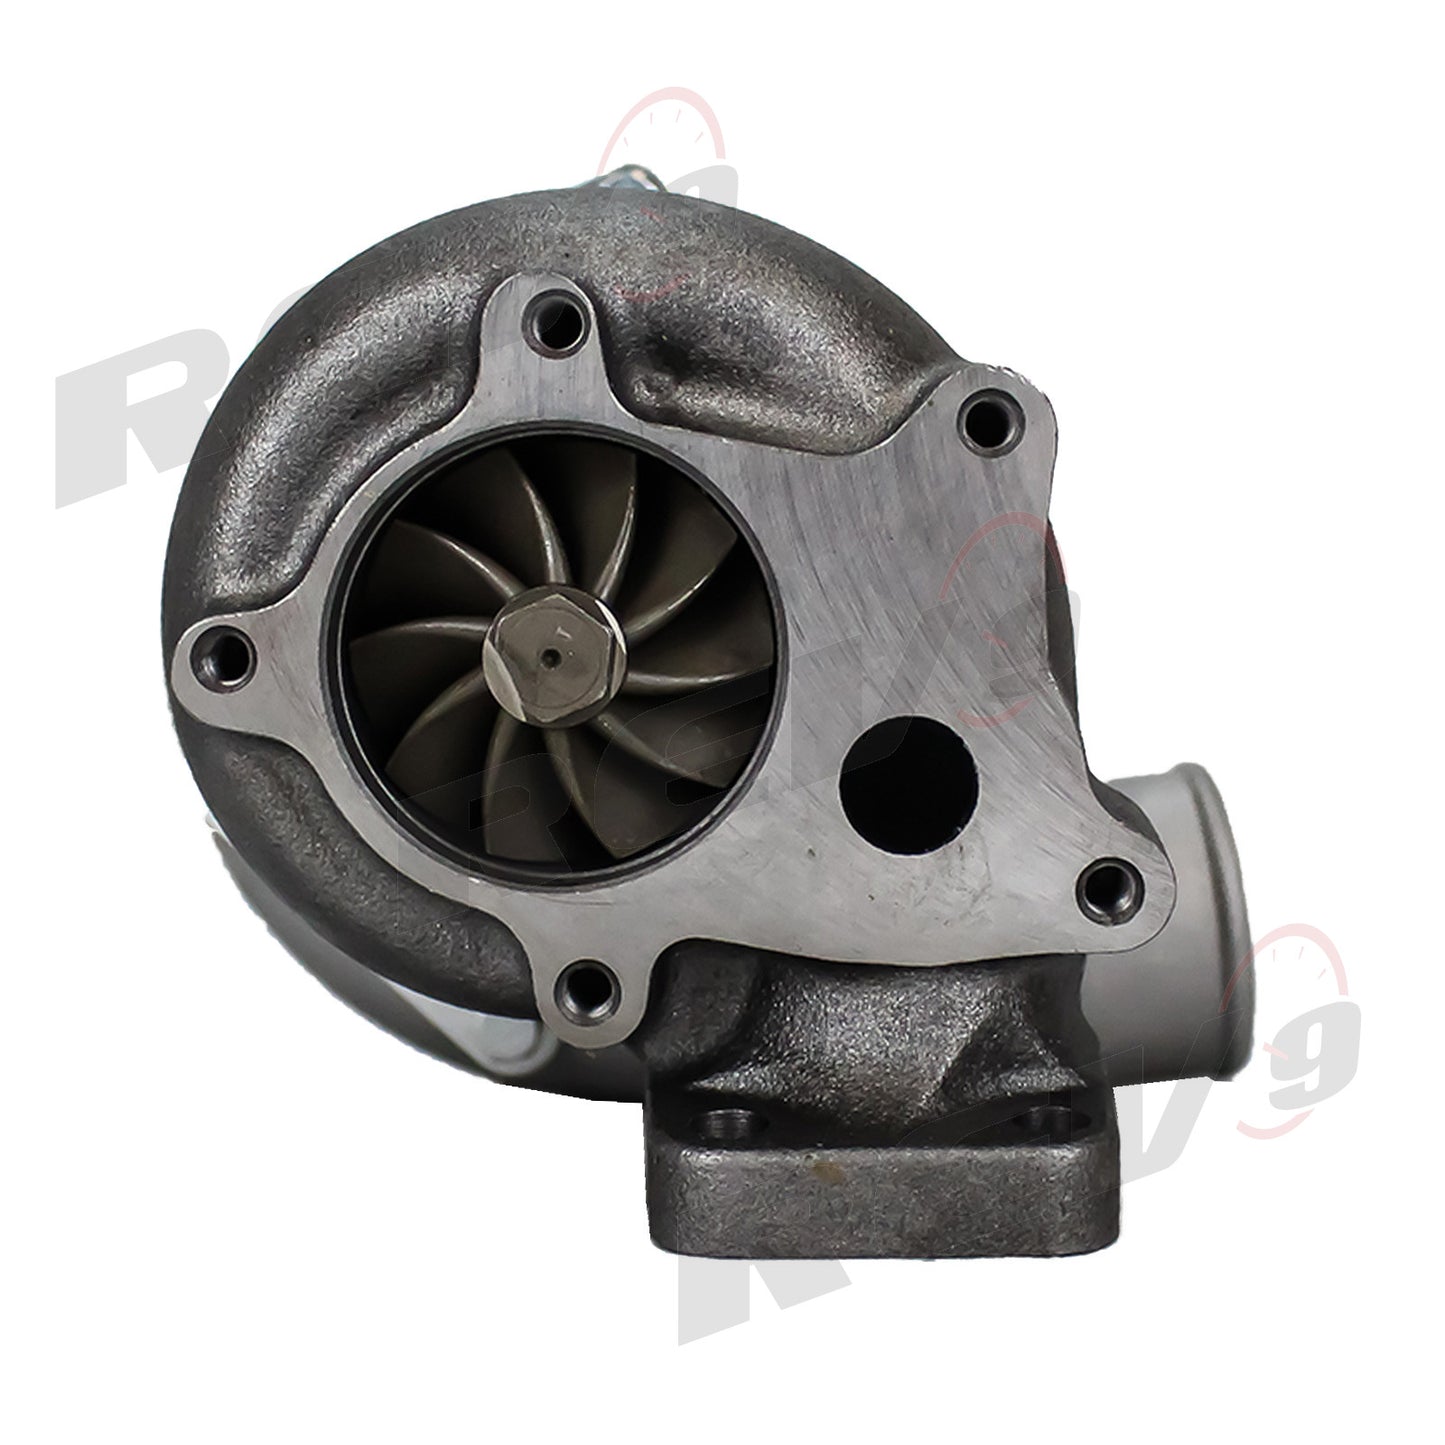 Rev9 TX-60-62 TurboCharger Turbo Charger T3 63 A/R 5 bolt Exhaust Flange 600hp